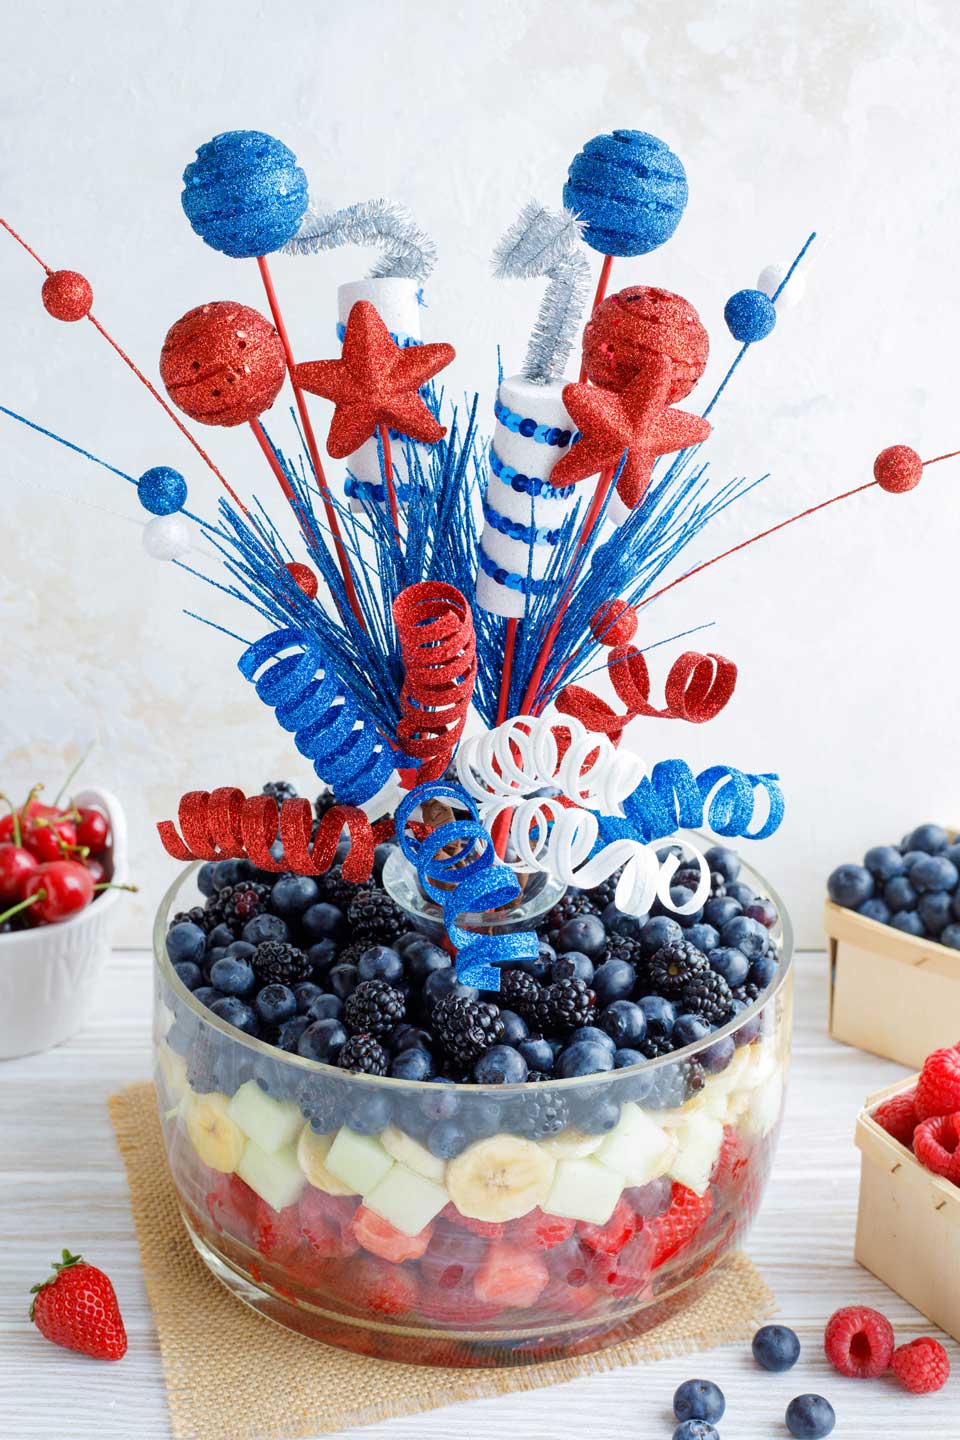 Centerpiece fruit salad featuring layered red white and blue fruits and festive party decorations coming up out of the middle of the bowl